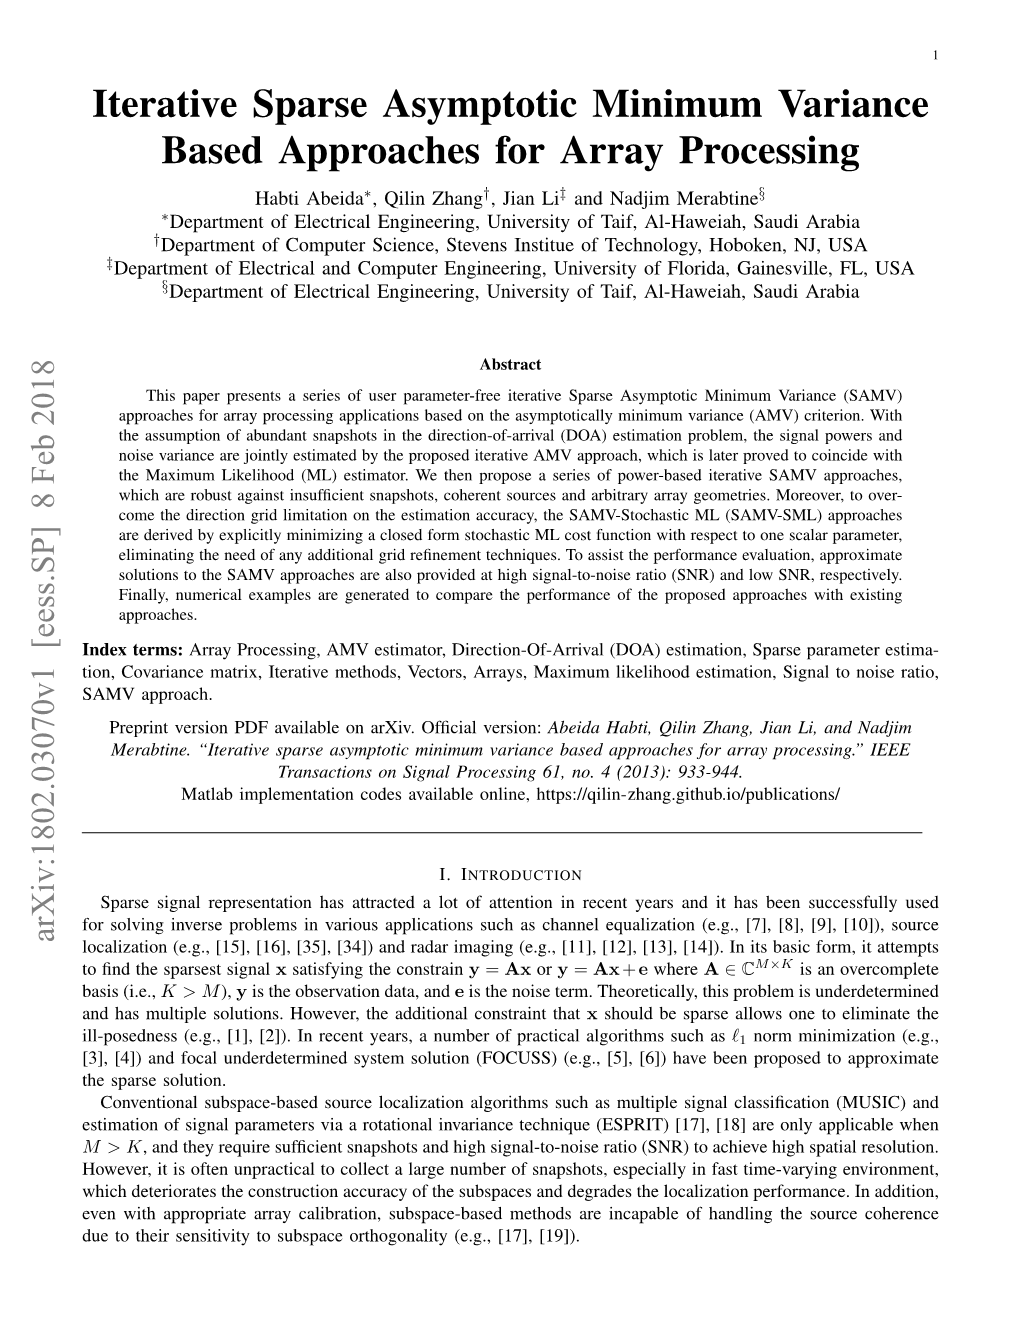 Iterative Sparse Asymptotic Minimum Variance Based Approaches For